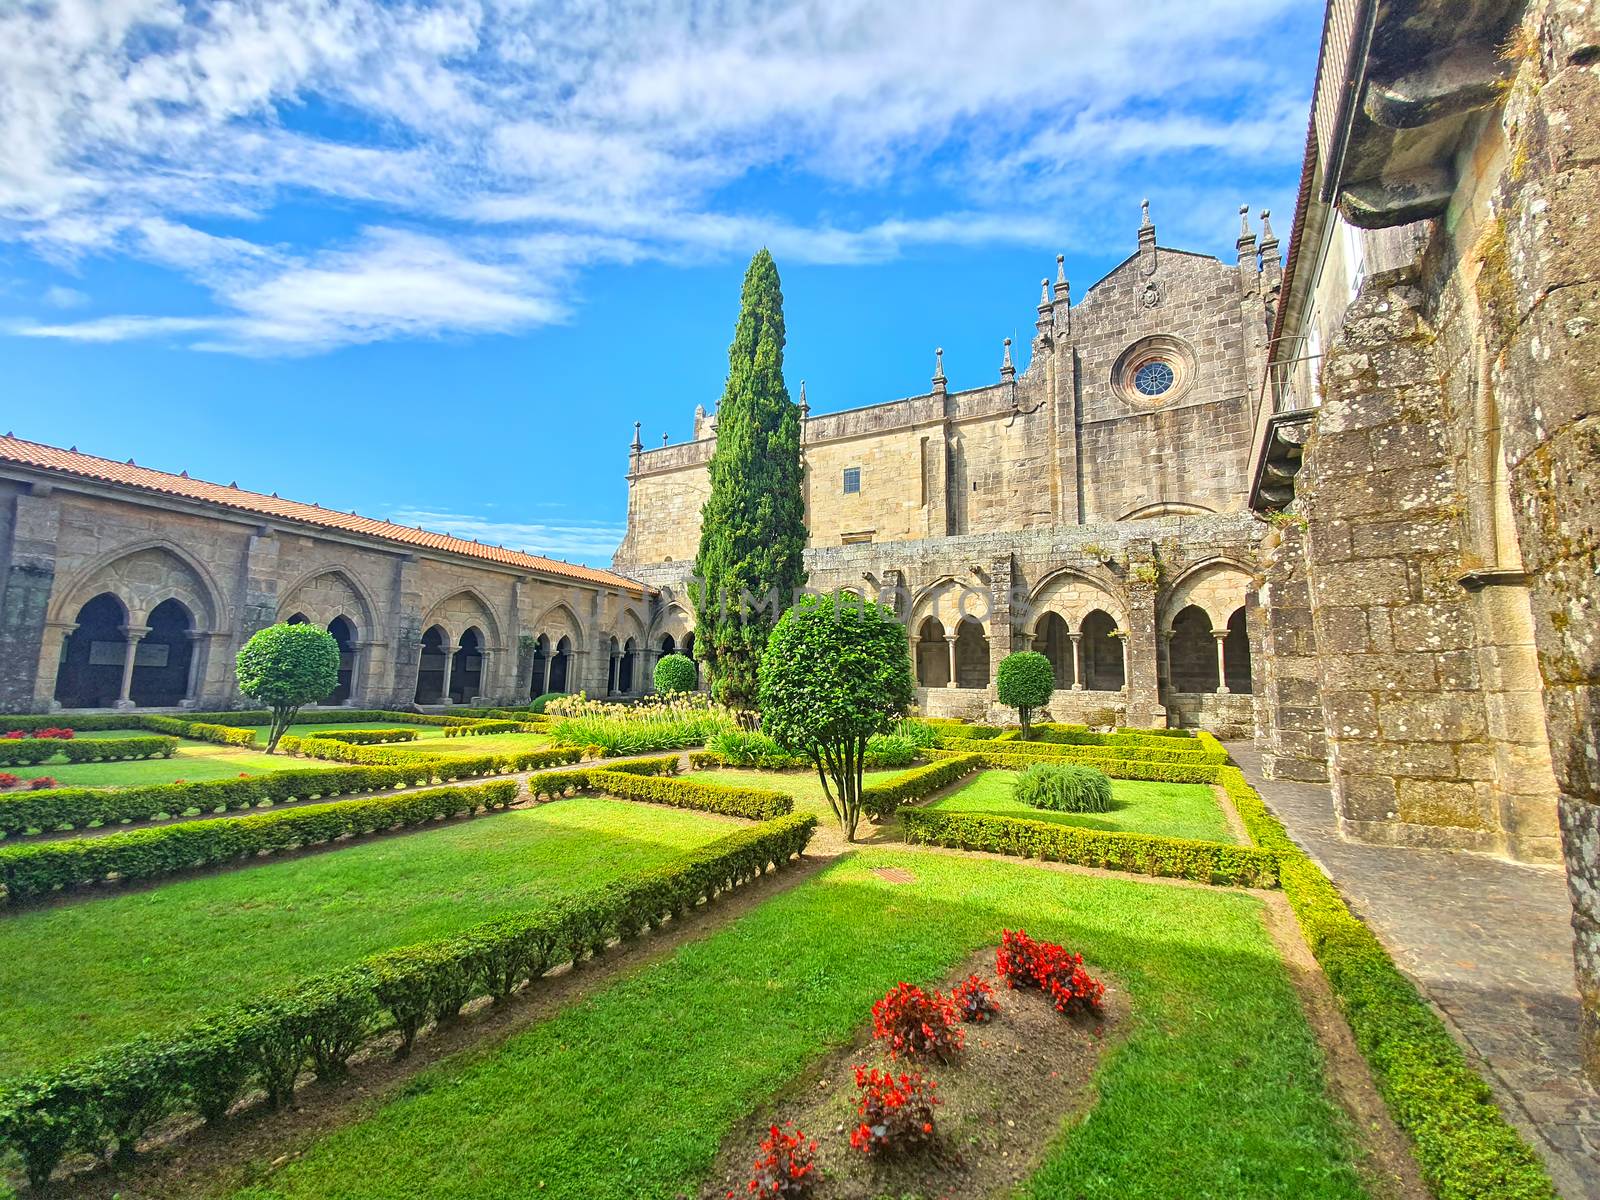 Tui Cathedral of Saint Mary (12th century), Cistercian Cloister garden of Tui, Galicia